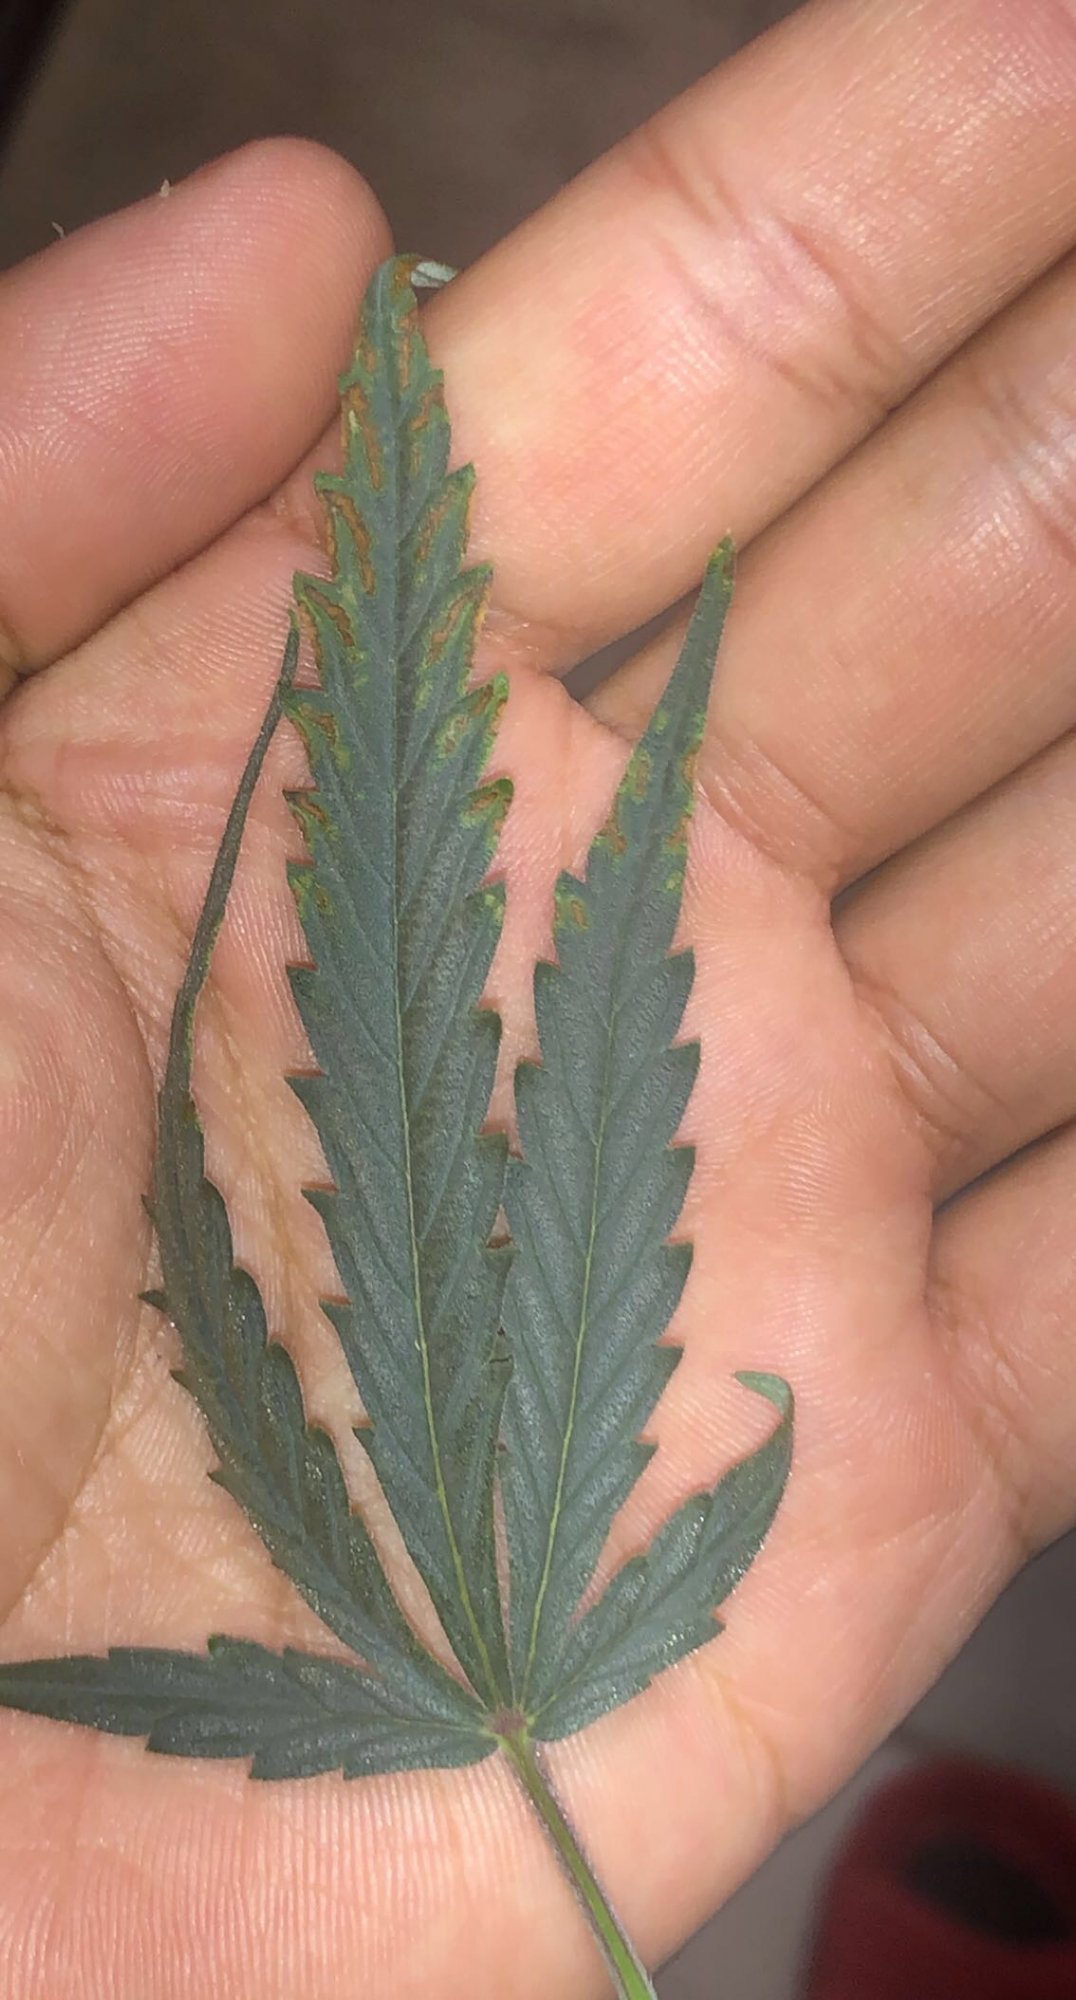 Is this a calcium deficiency 2